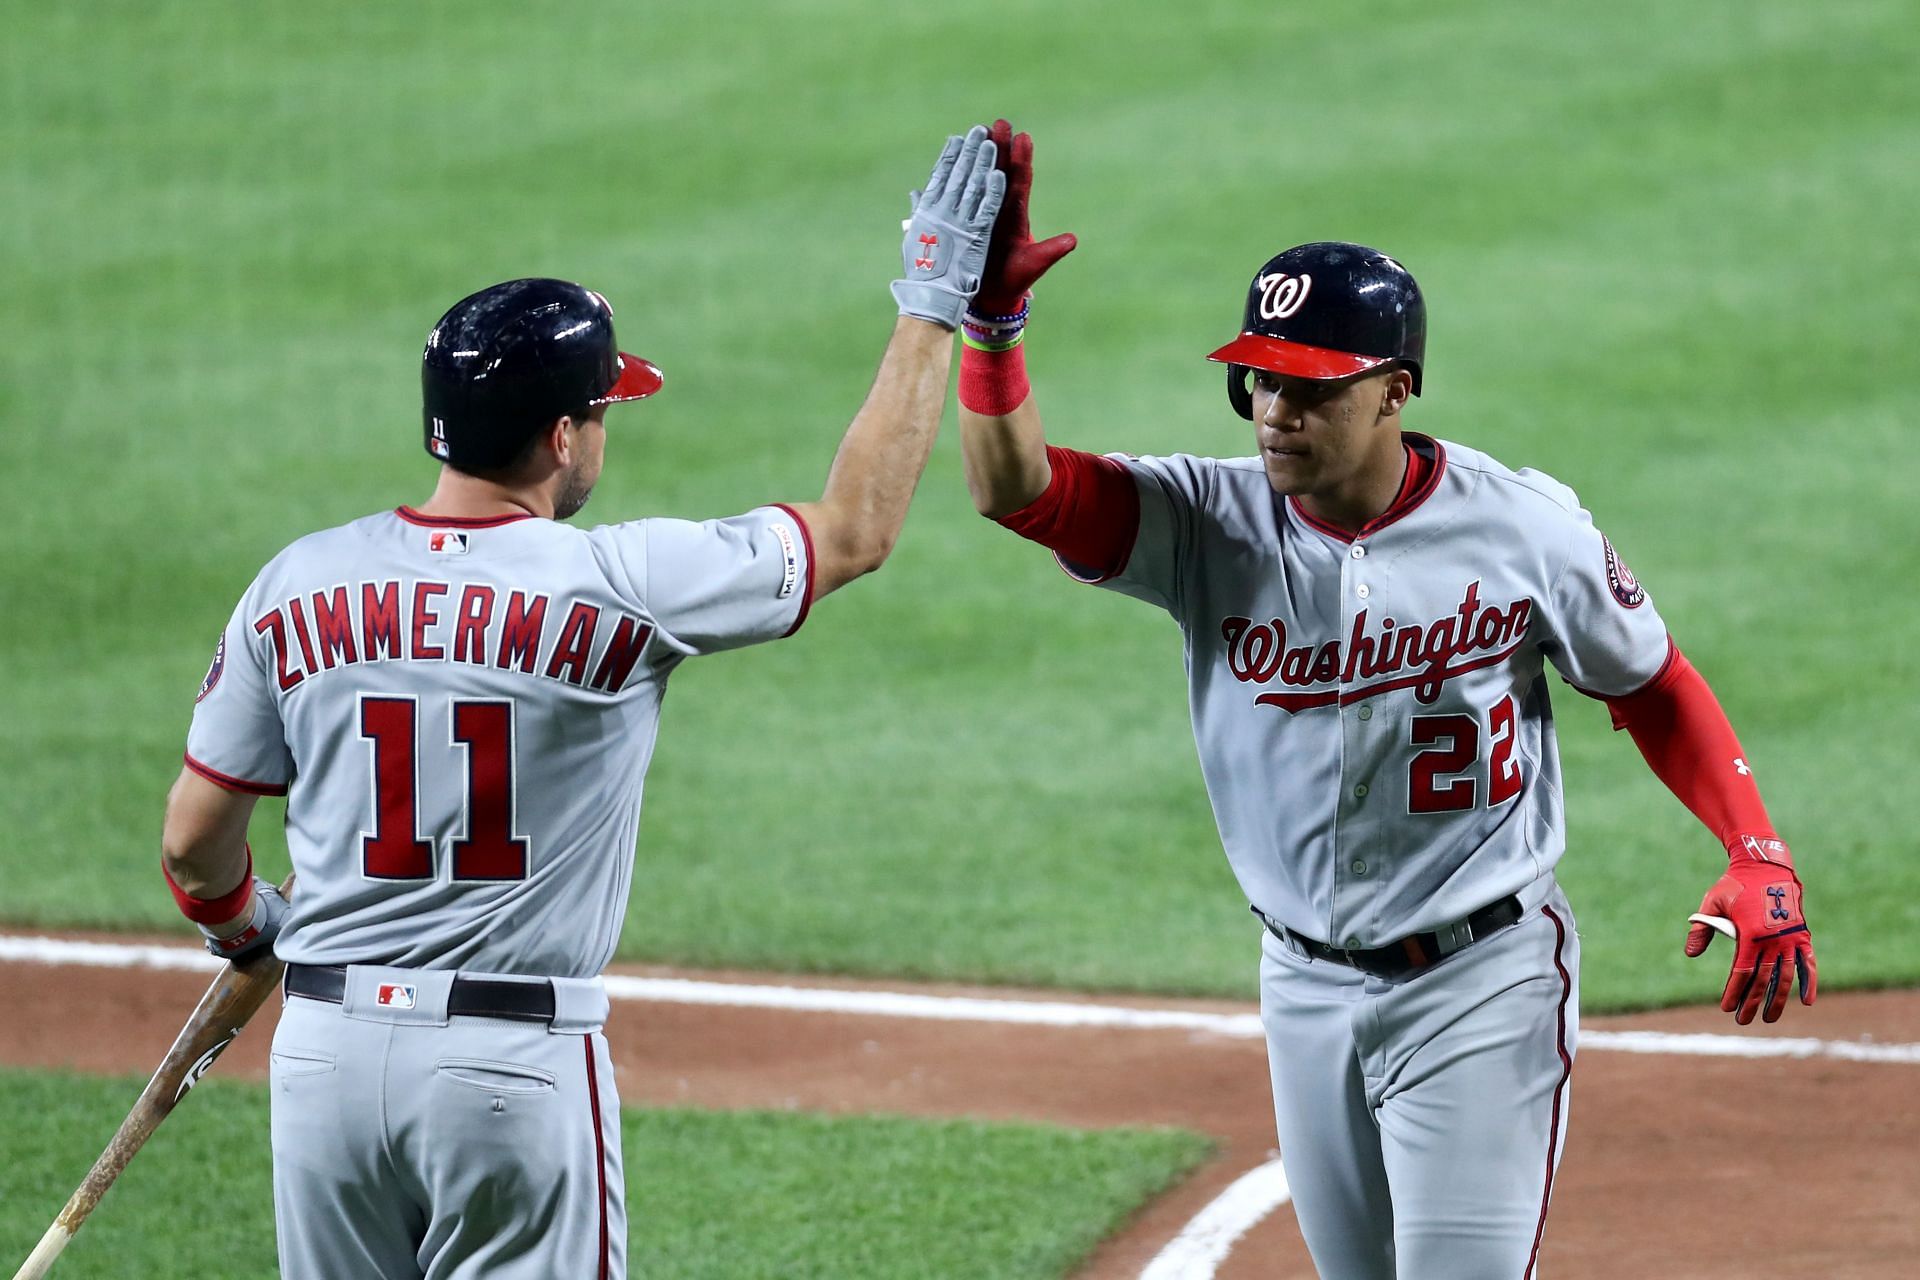 Ryan Zimmerman (left) and Juan Soto (right) during a Washington Nationals v Baltimore Orioles game